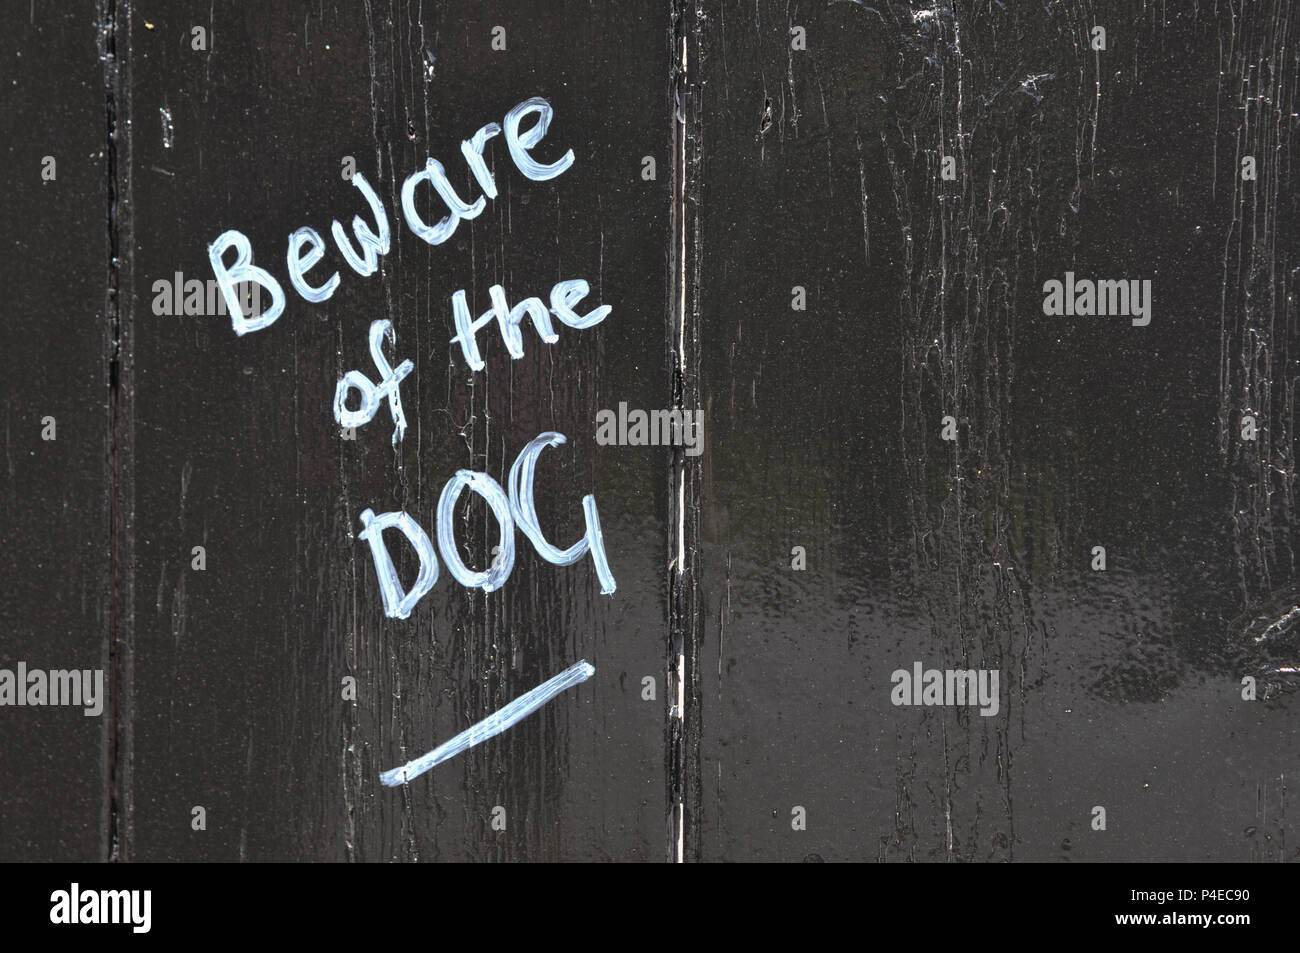 Beware of the dog chalk writing on a black painted wooden fence Stock Photo